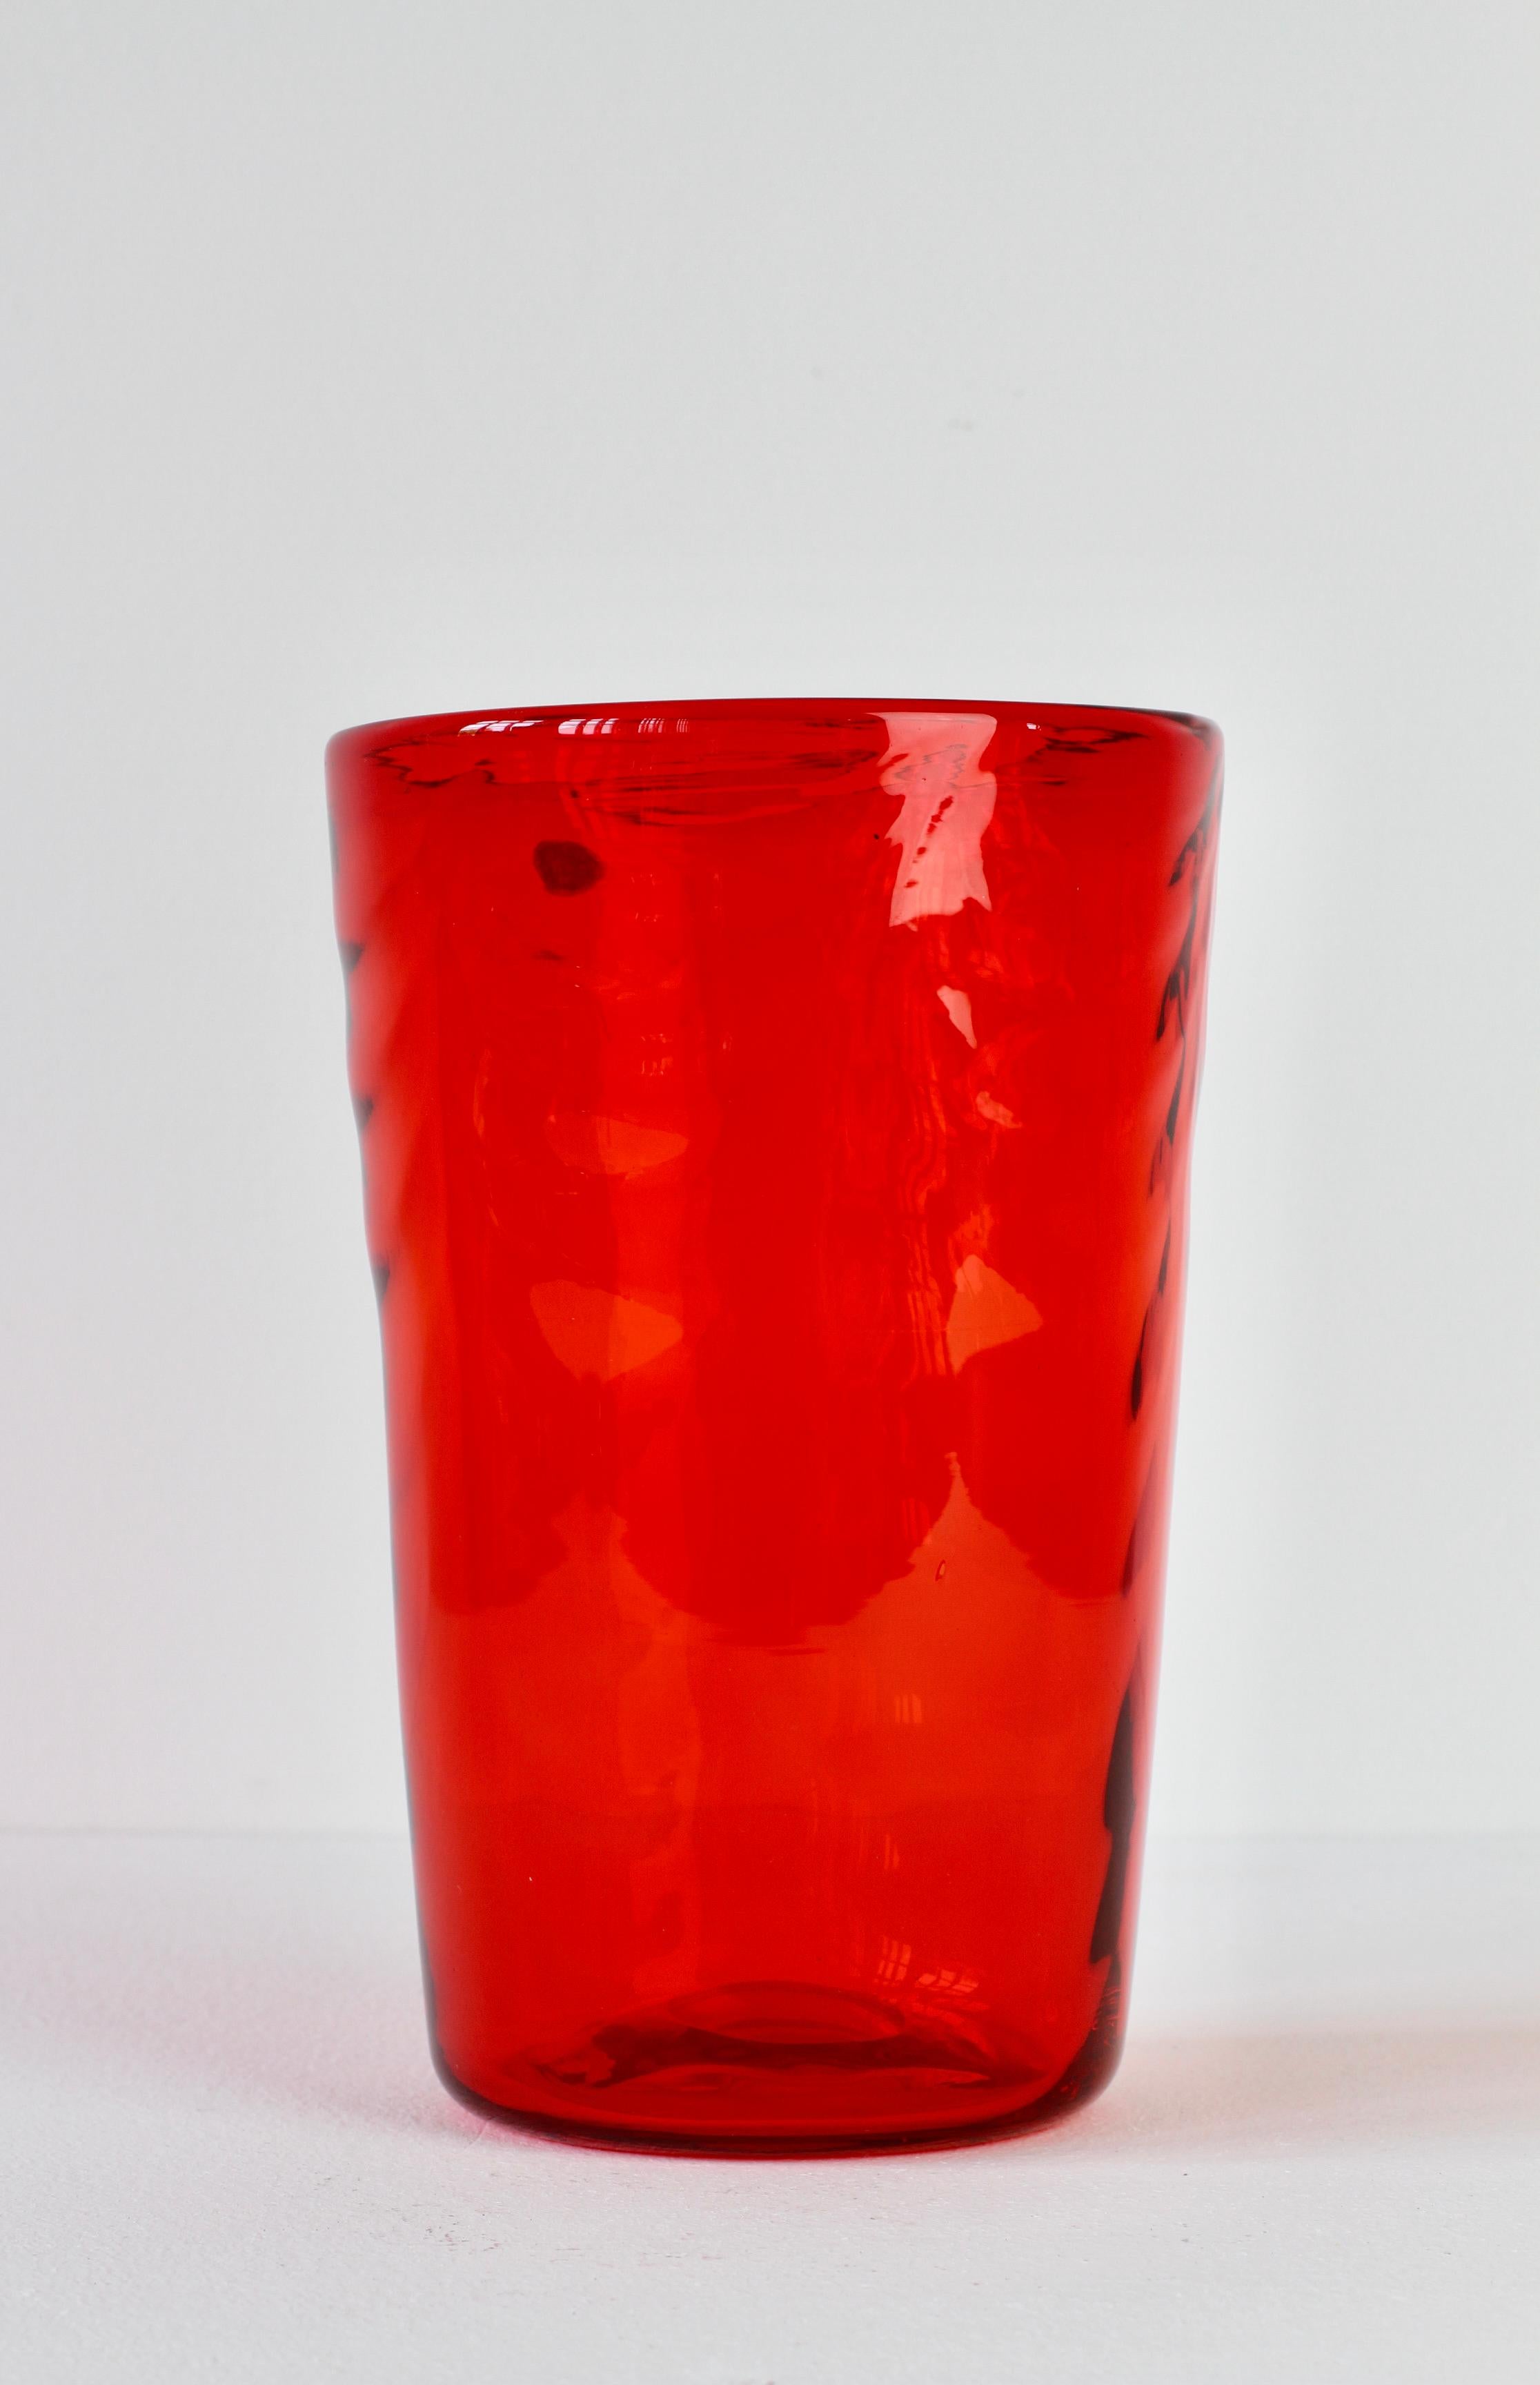 Whitefriars Vintage Vibrant Red Glass Vase by Barnaby Marriott Powel, C. 1940 For Sale 1